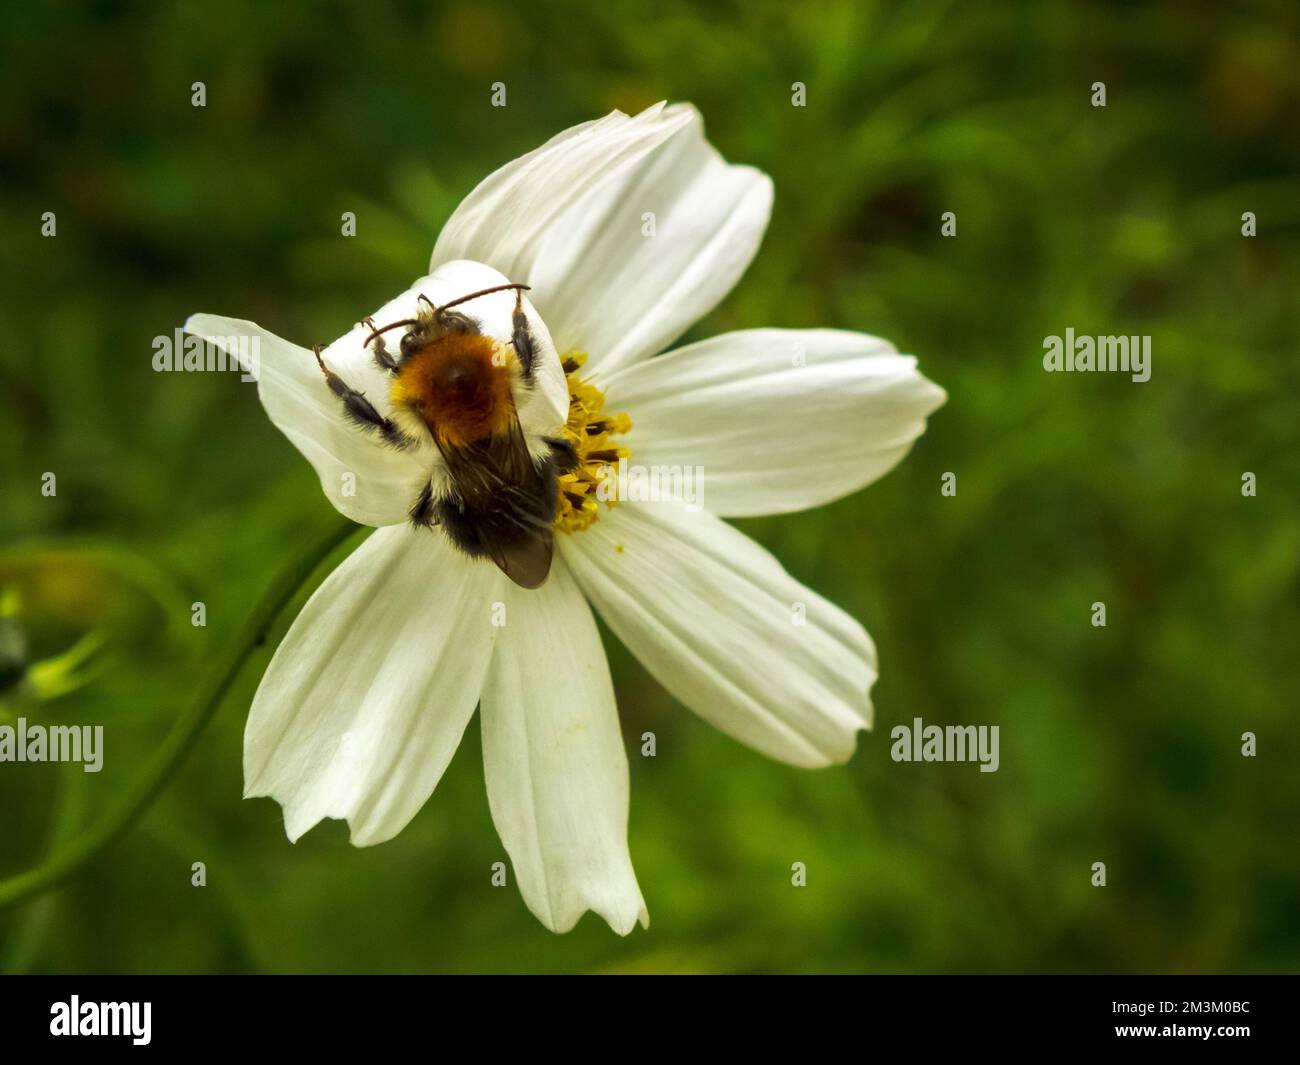 A closeup of bee sipping nectar from white flower Stock Photo